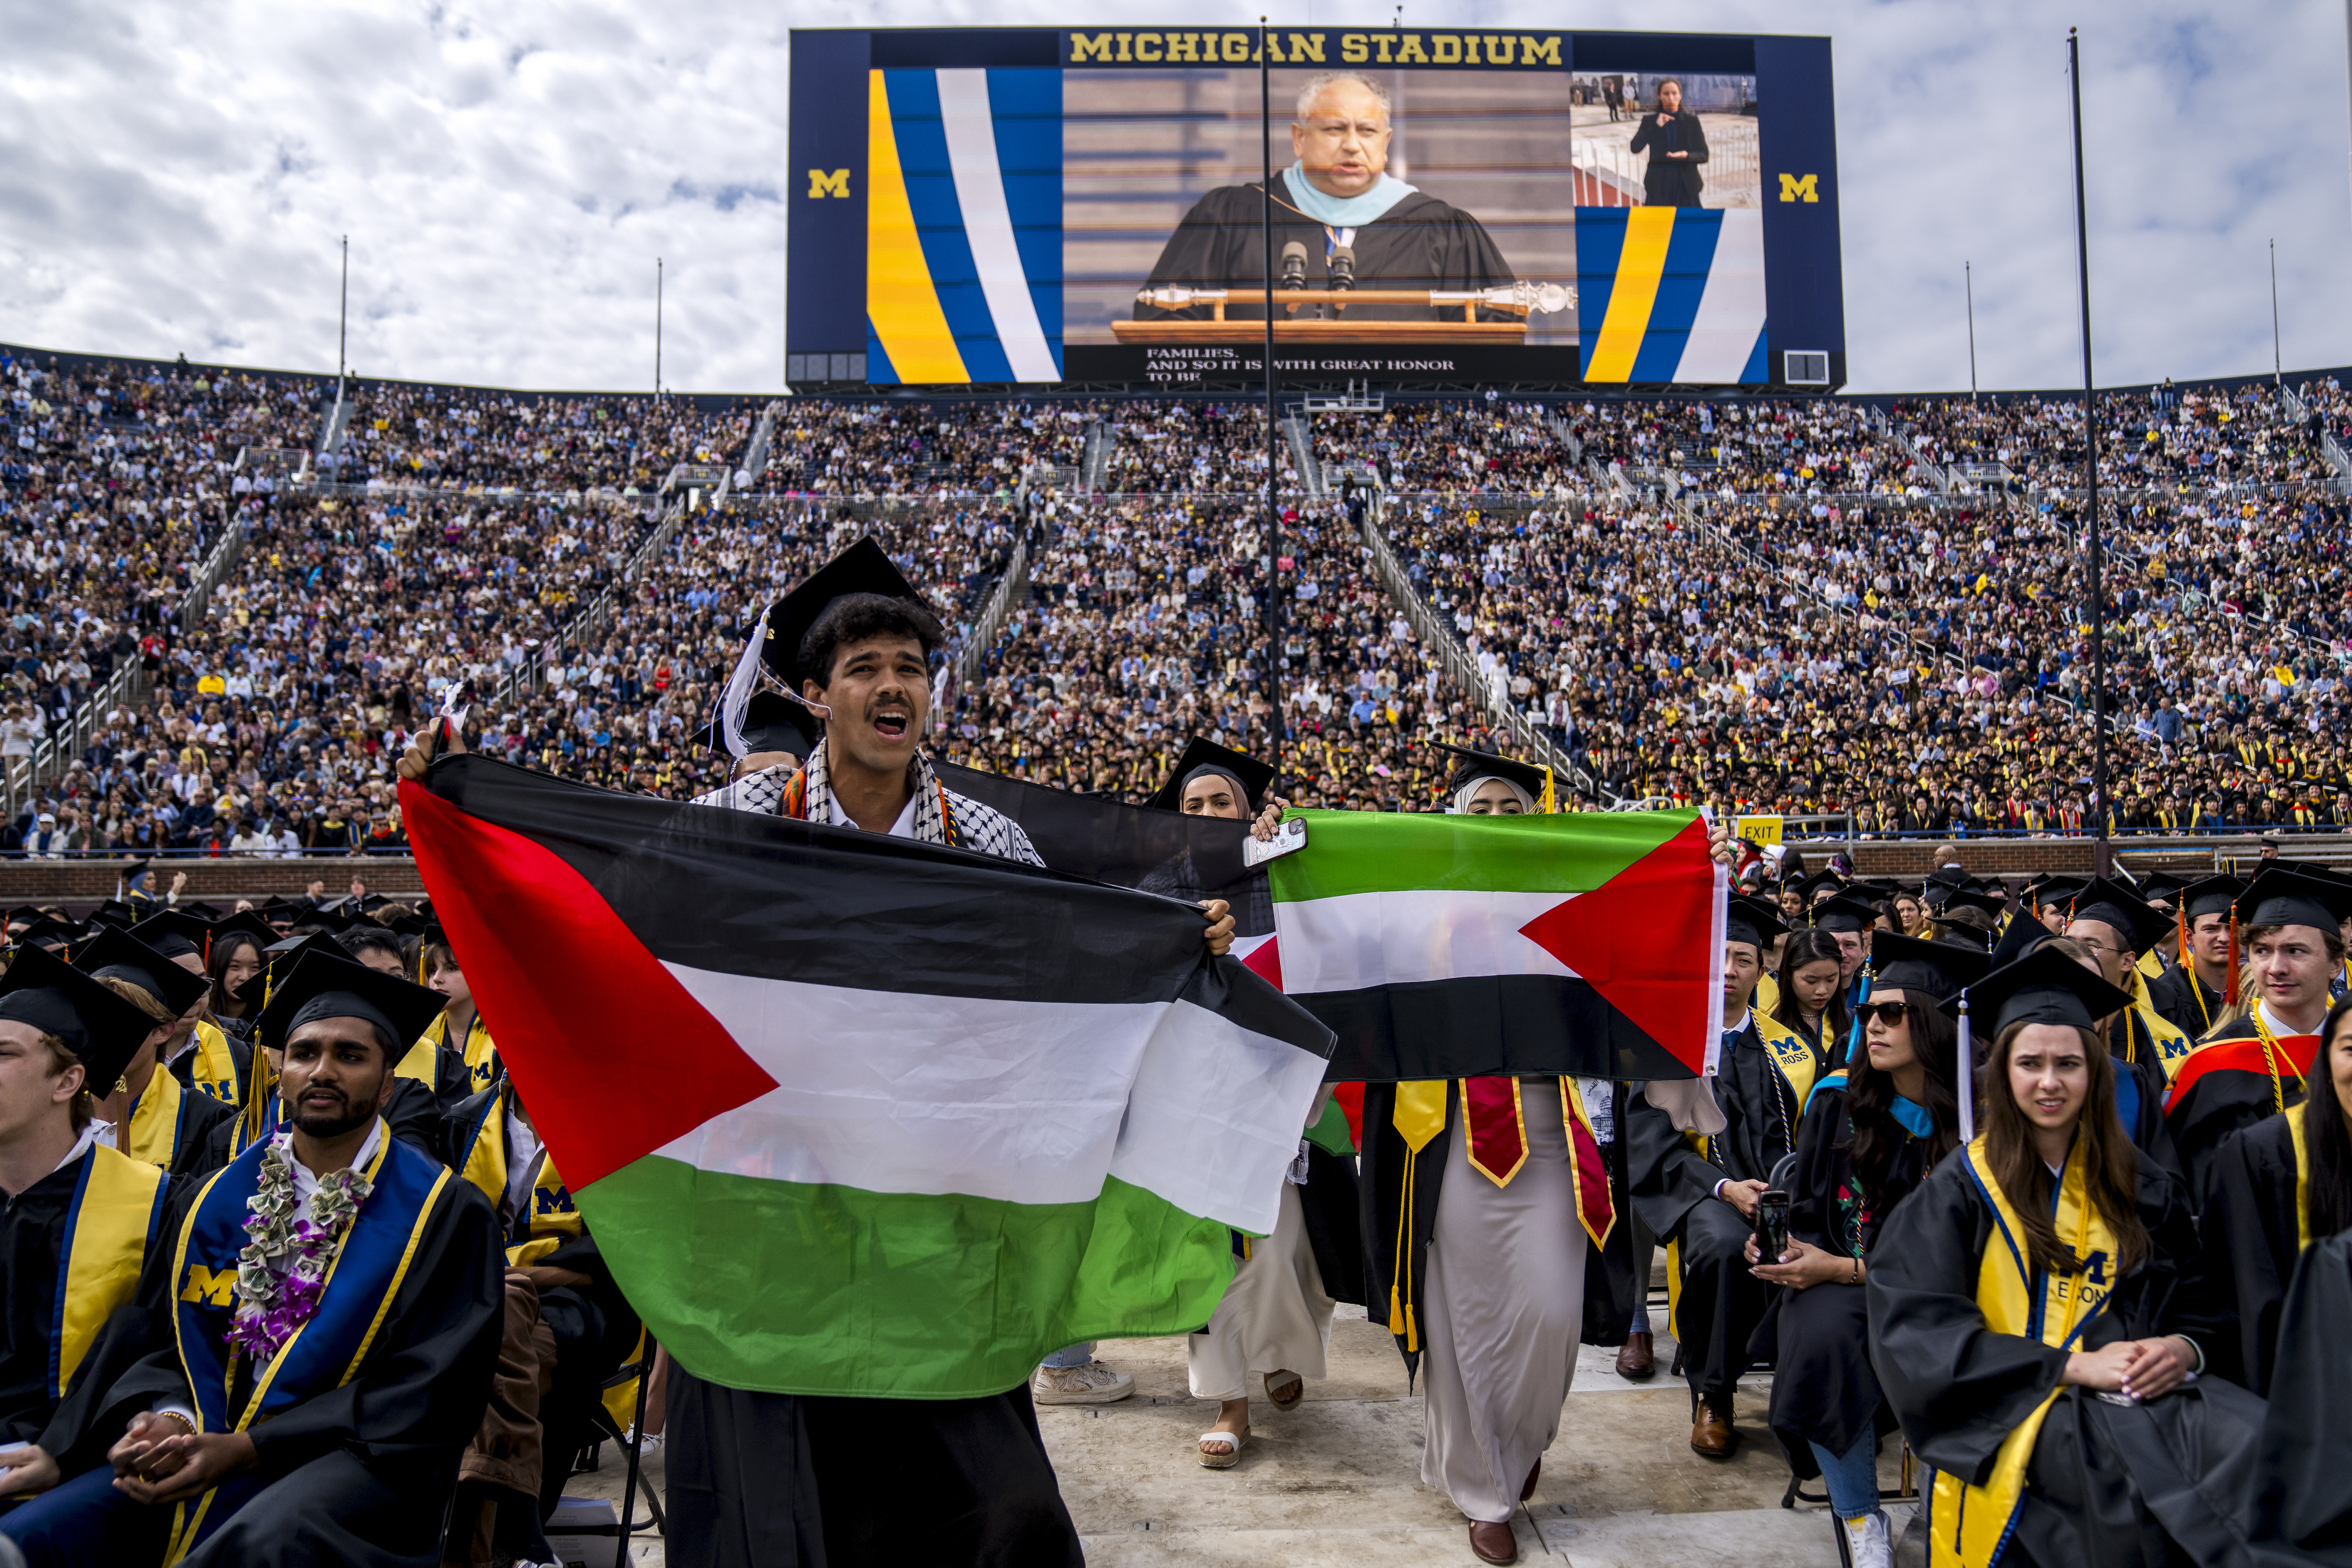 Pro-Palestinian protesters are pictured during the University of Michigan's commencement in Ann Arbor on May 4.